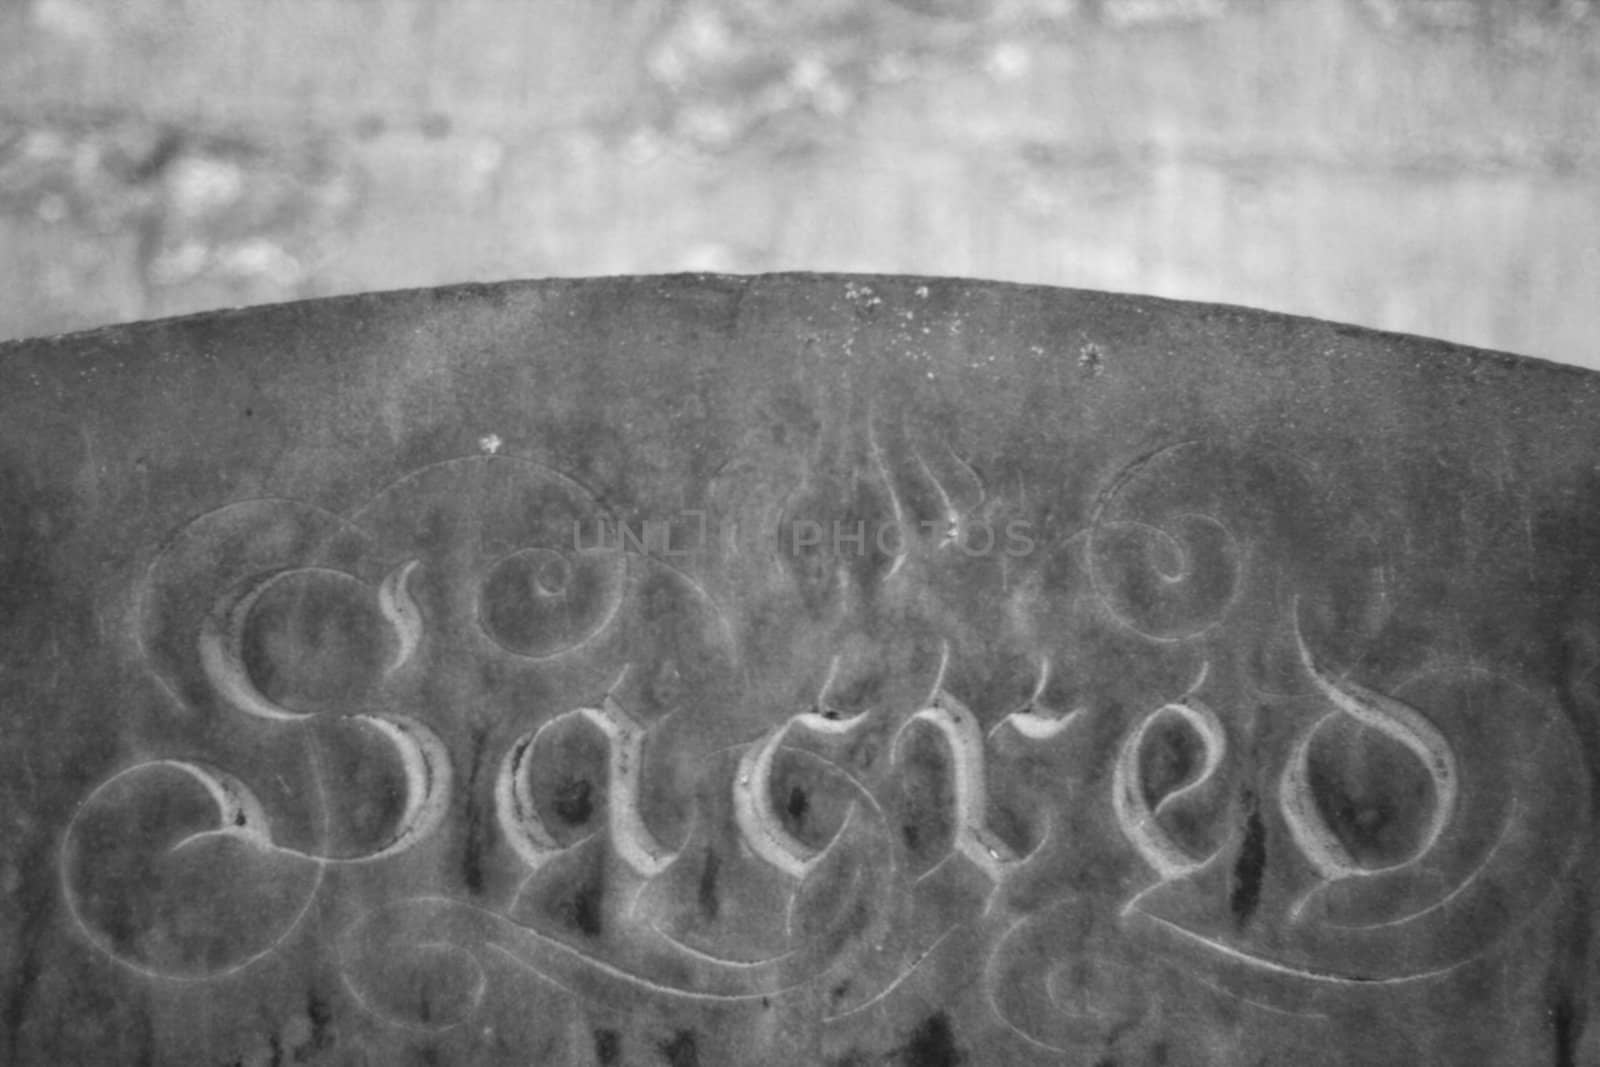 black and white image of a grave stone with the word "sacred" lot of stone texture visible